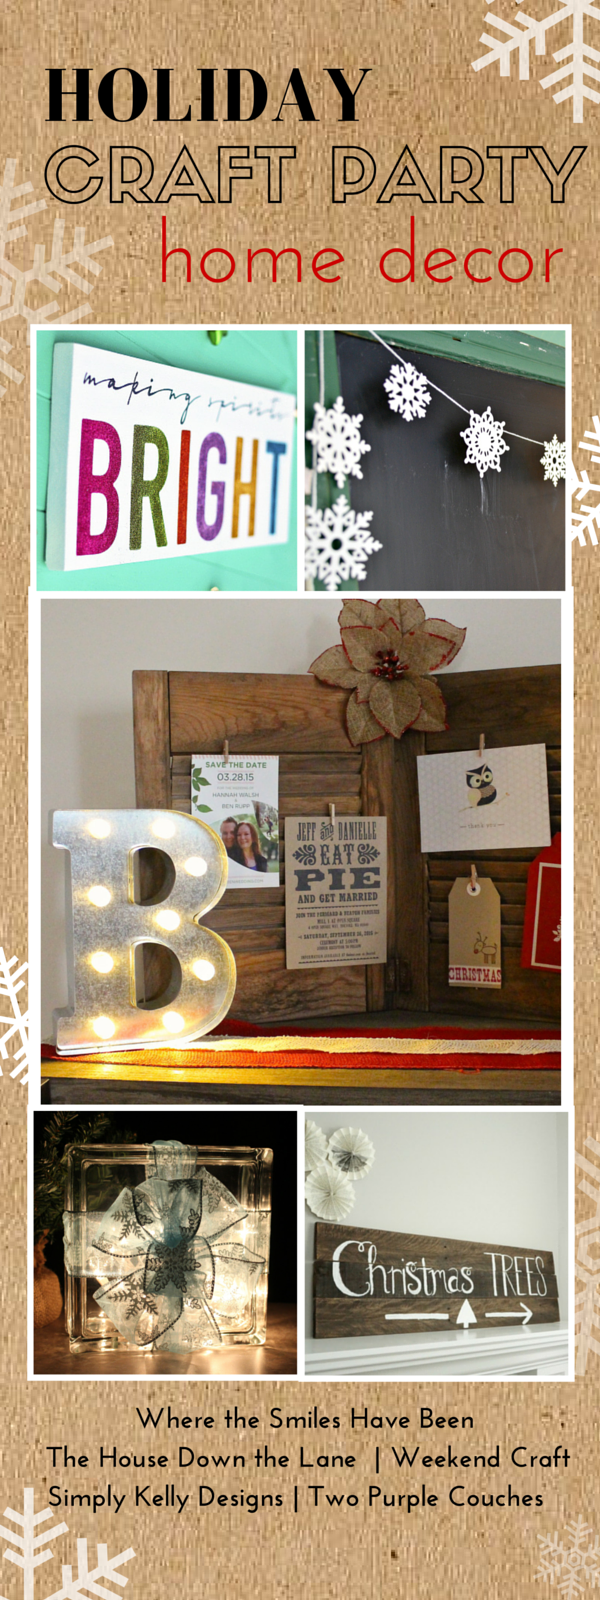 Beautiful DIY holiday home decor ideas! These would make great gifts, too! Join us for our Holiday Craft Part - a week full of holiday crafts, creative ideas and inspiration!